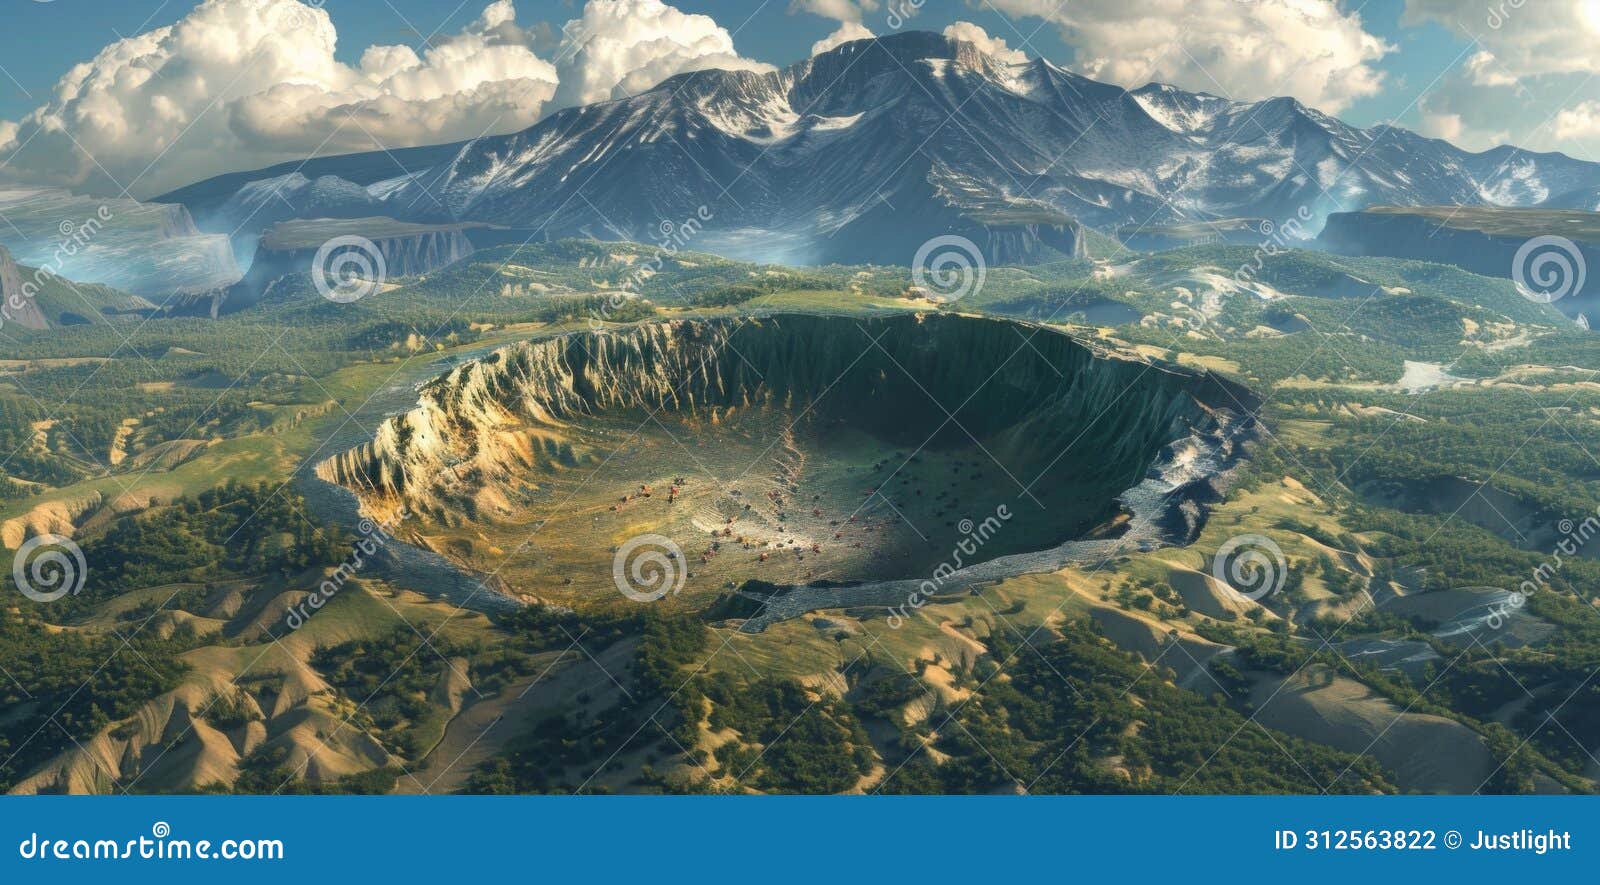 a serene mountain range is suddenly interrupted by a monstrous crater indicating the ferocity of a meteorites collision